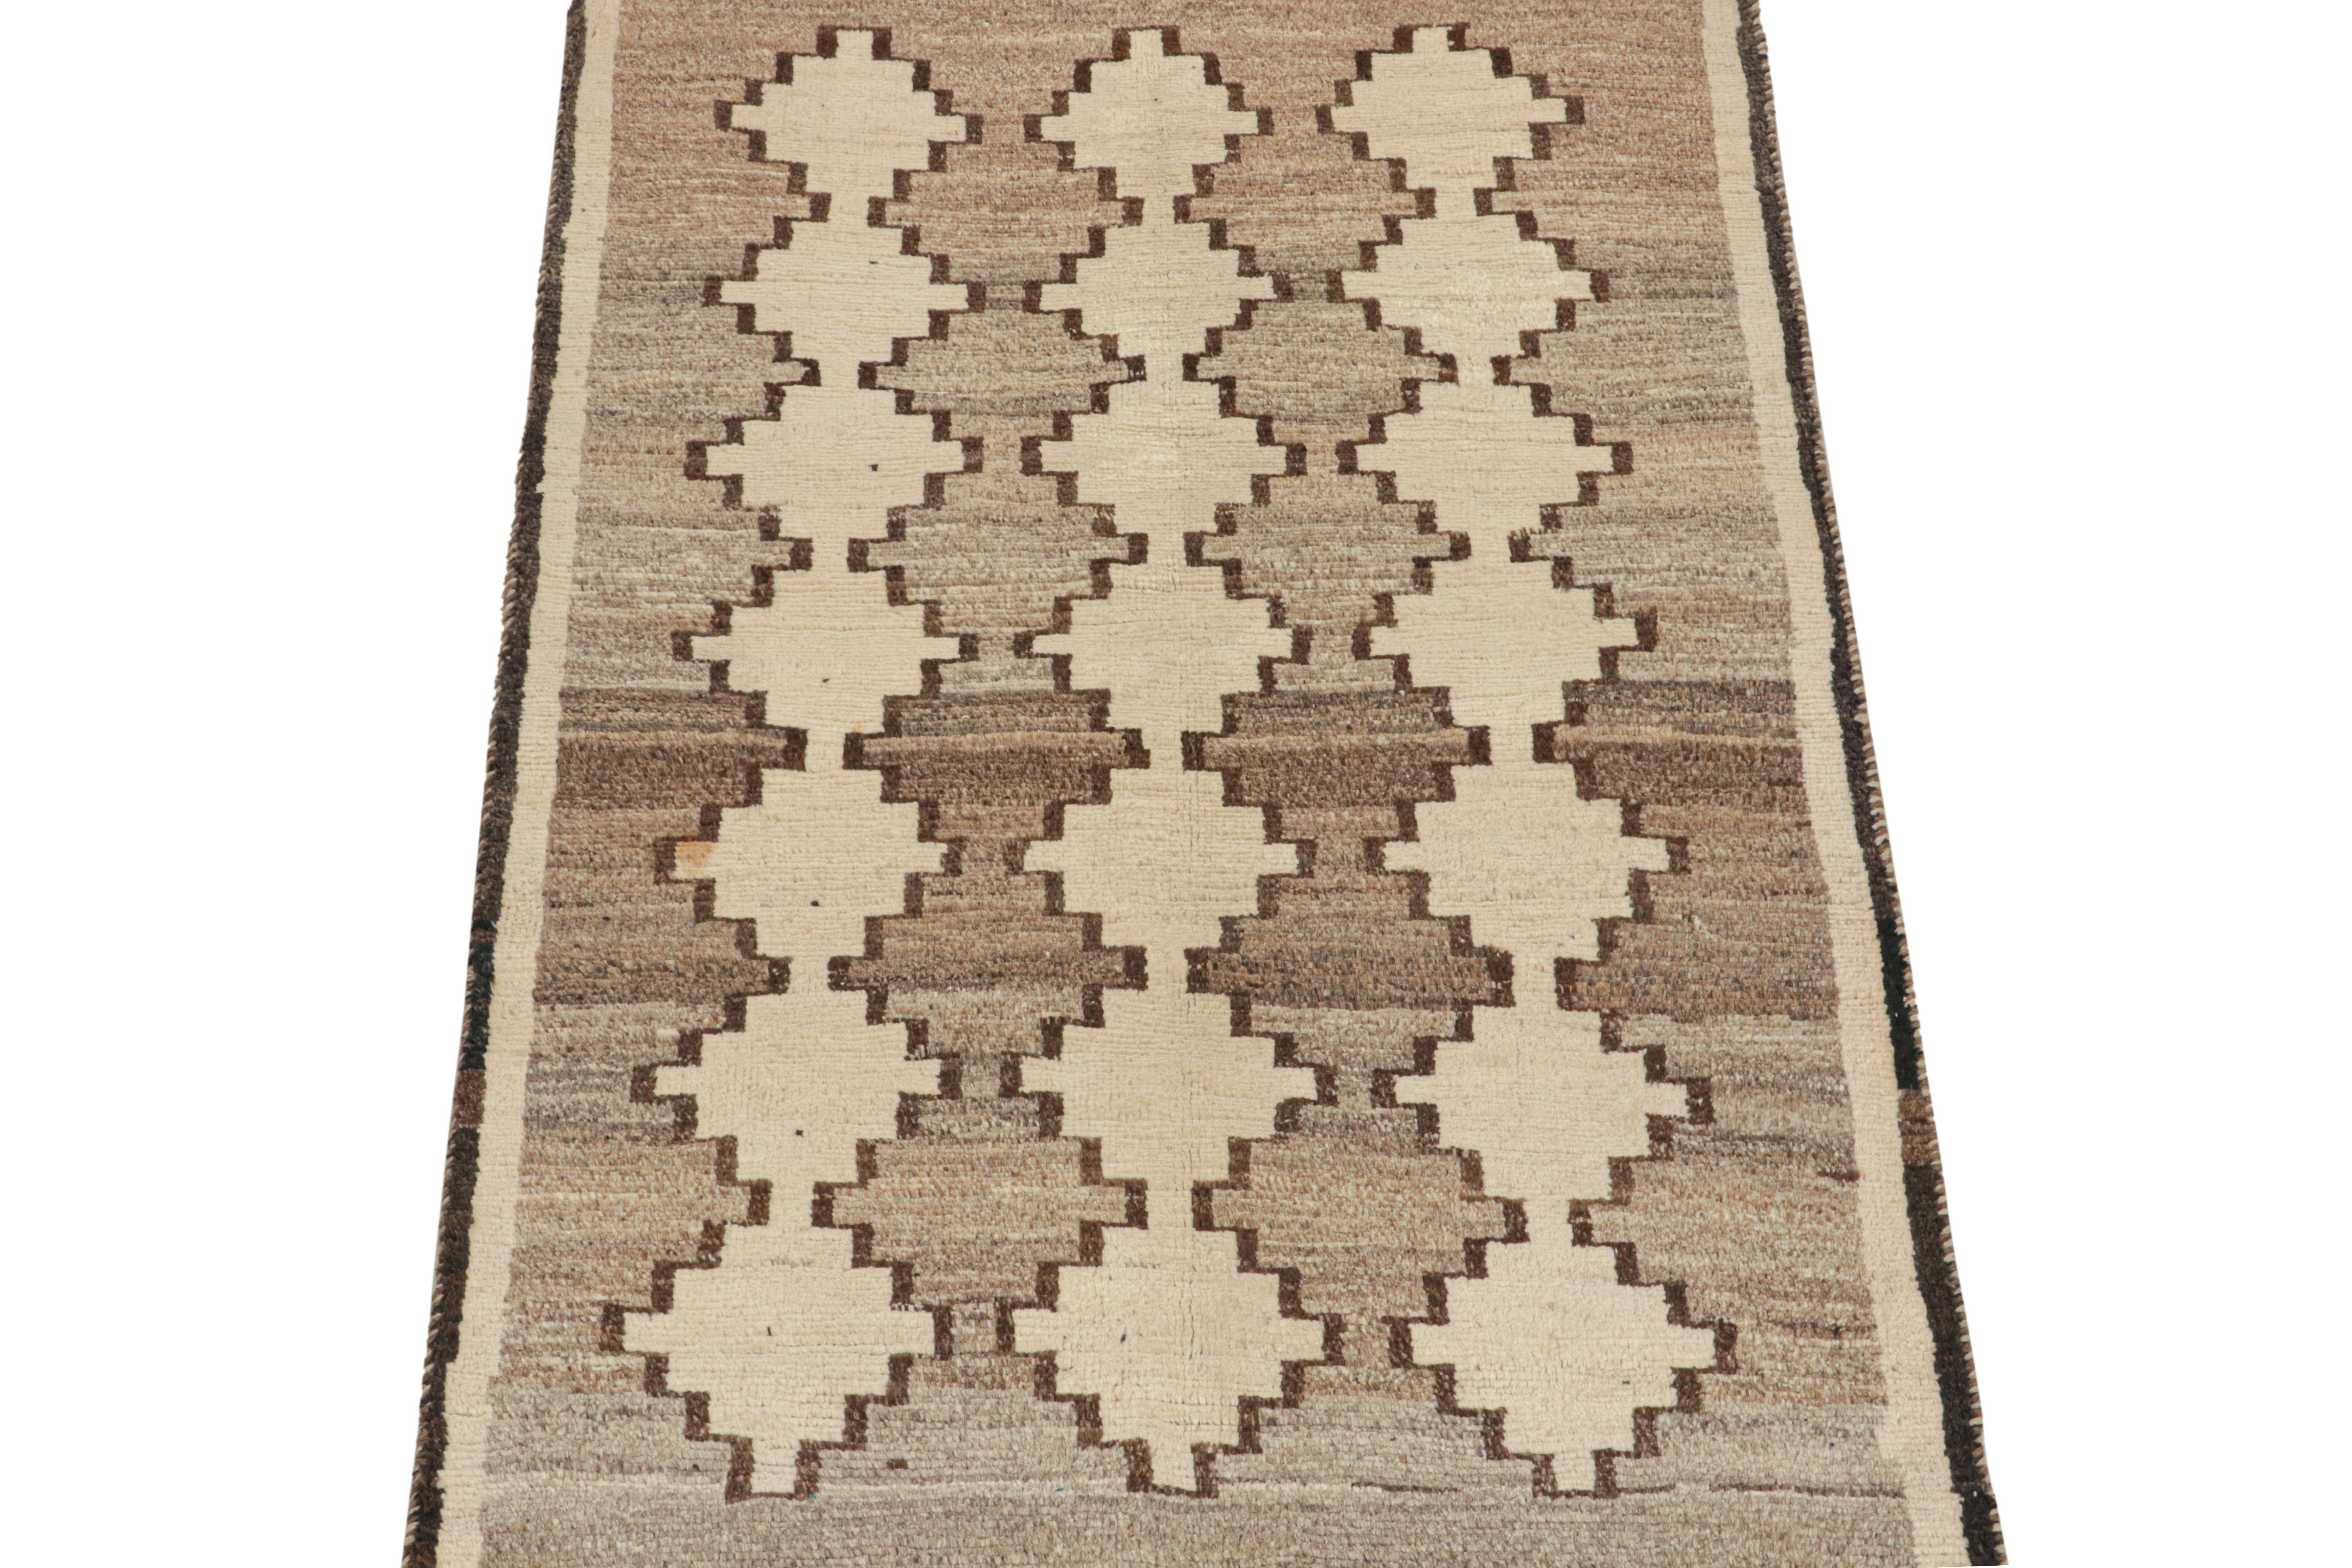 This vintage 4x6 Persian rug is a mid-century tribal piece, hand-knotted in wool circa 1950-1960.

Its design enjoys neutral tones in a beige-gray field with off-white geometric patterns and a rich brown border. Pieces like this represent the work